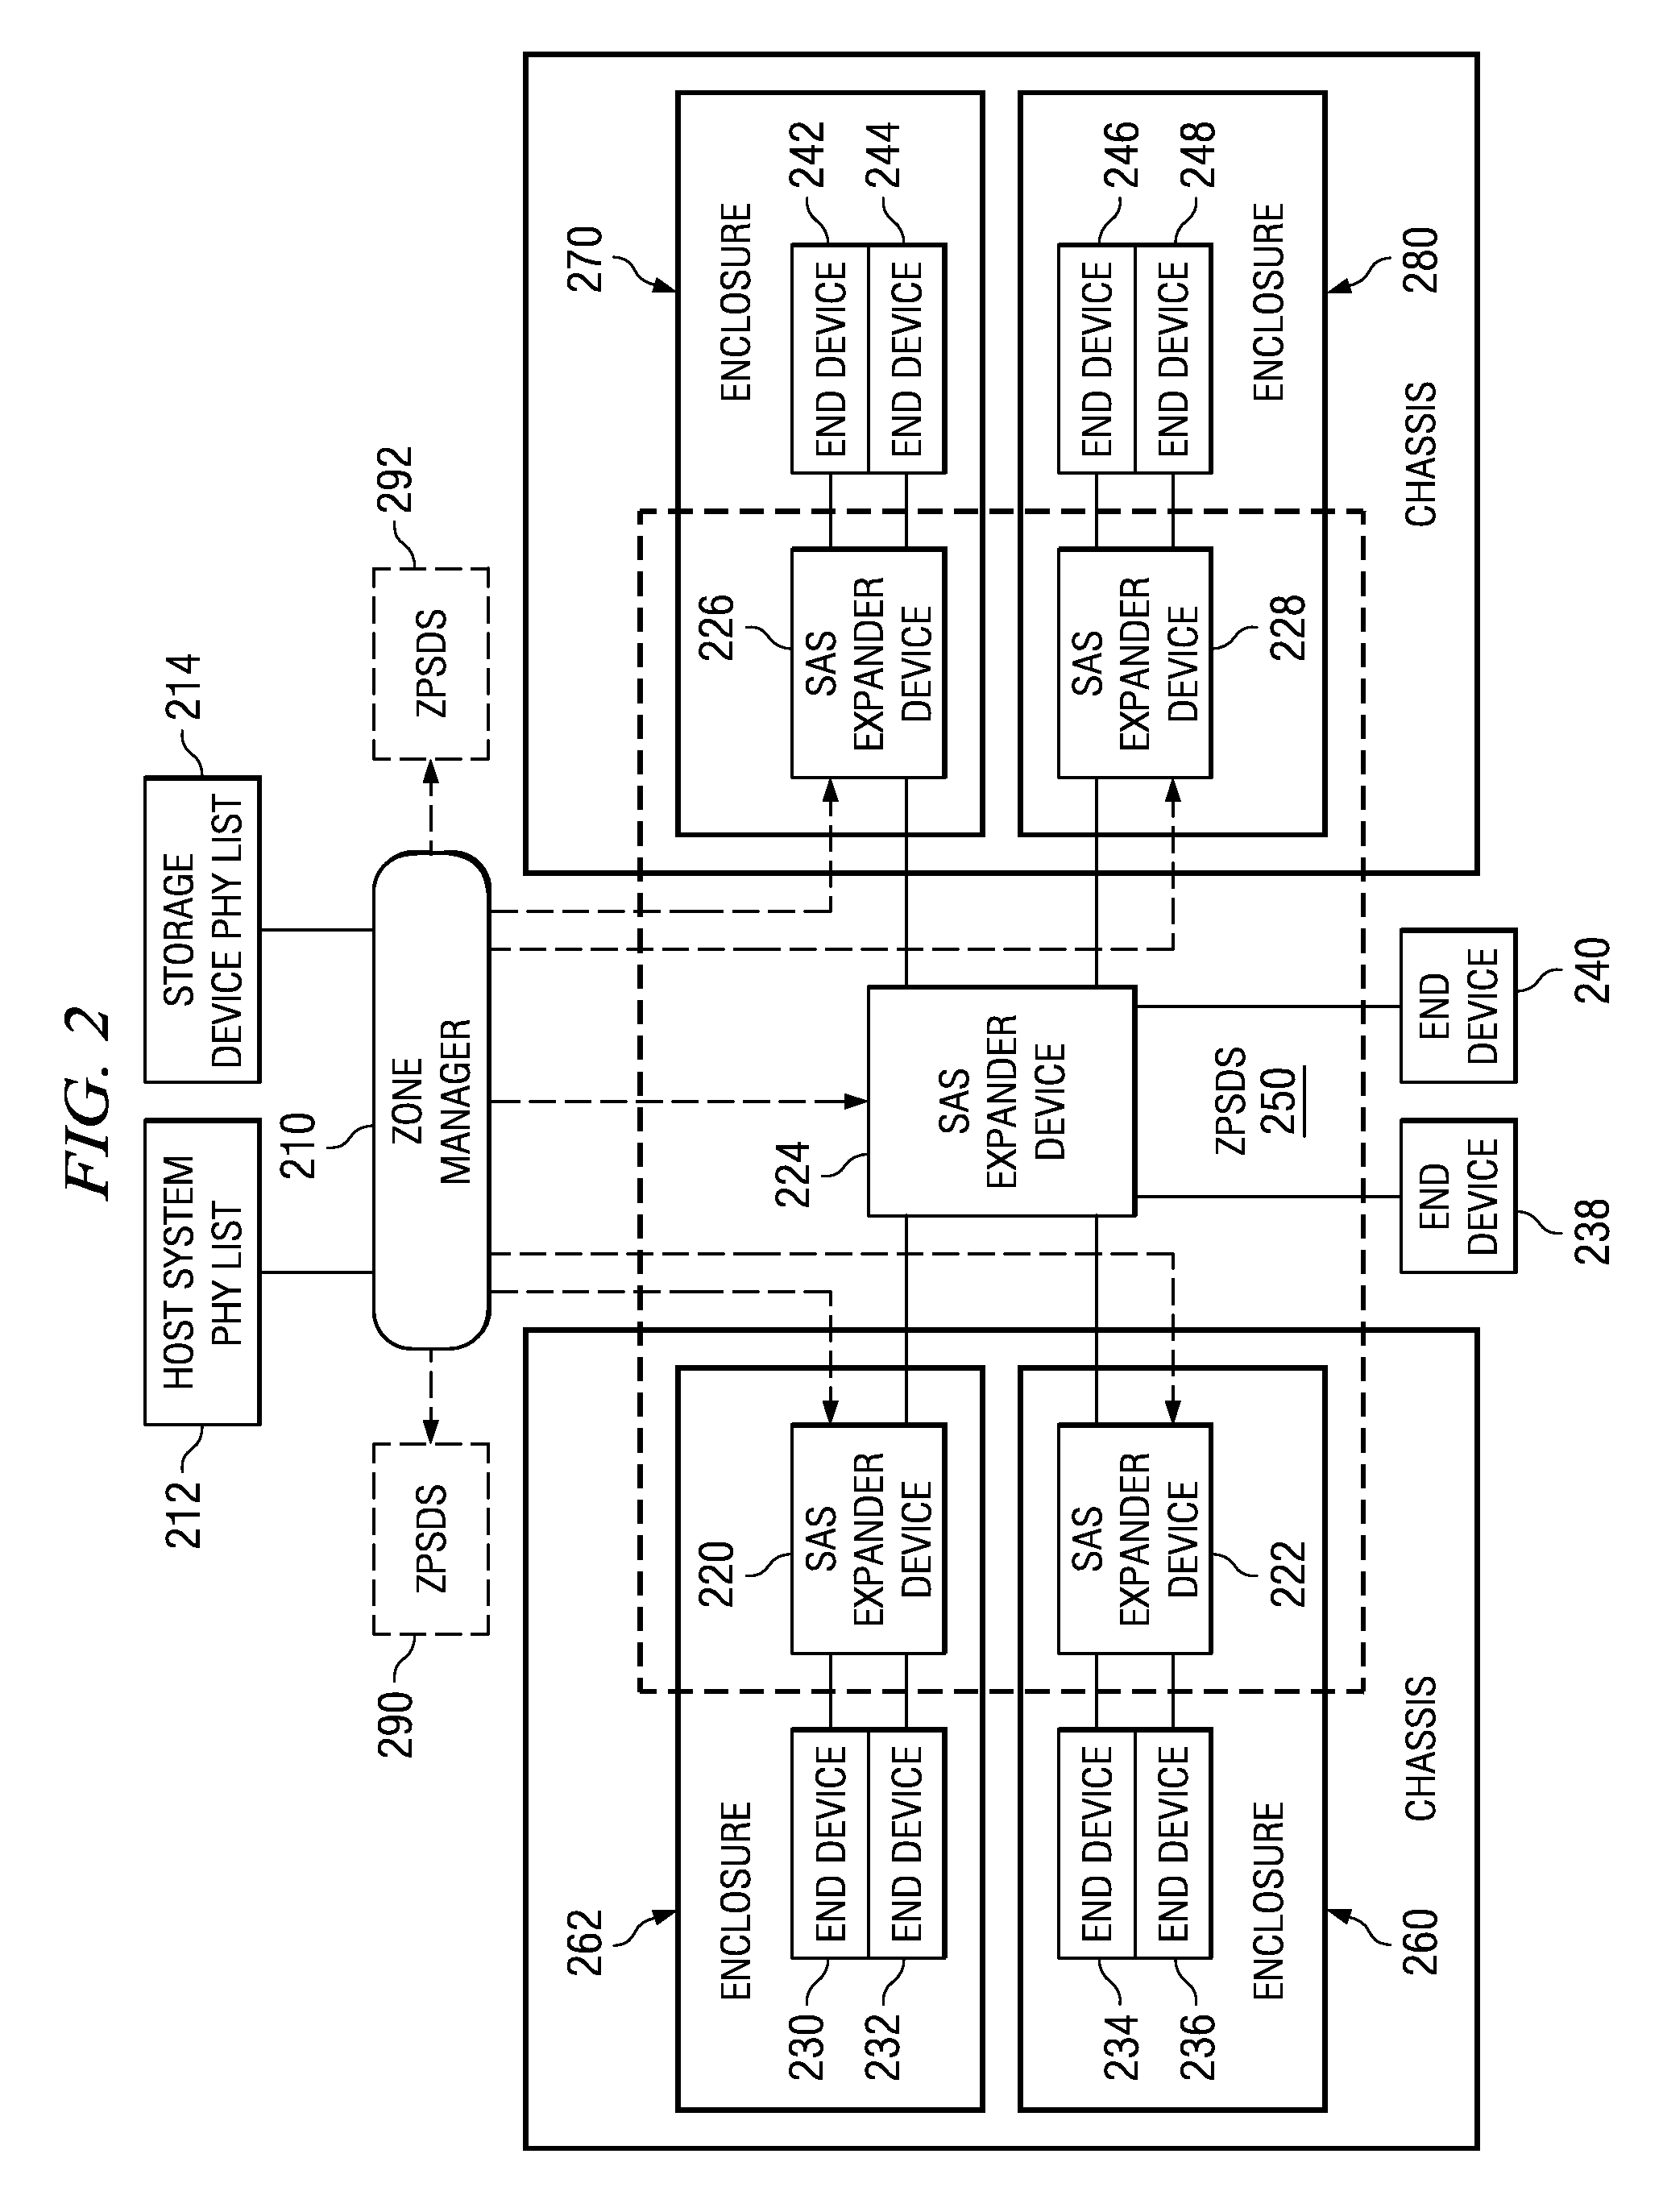 Zoning of devices in a storage area network